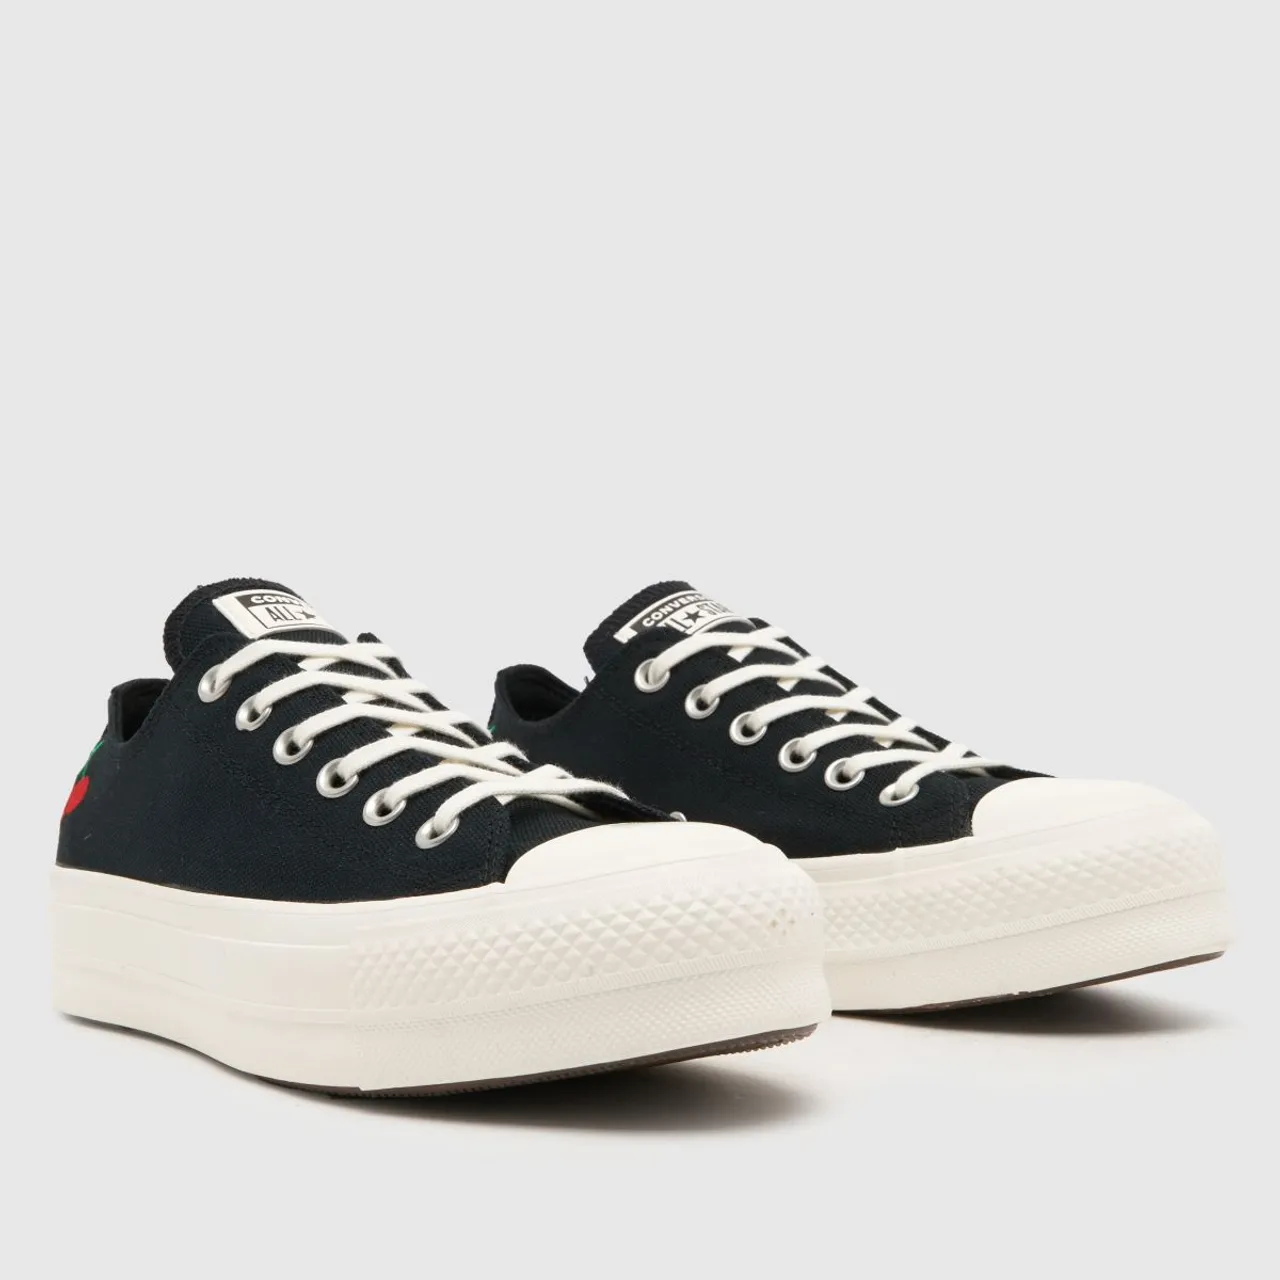 Converse all Star Lift ox Cherry on Trainers in Black & Red